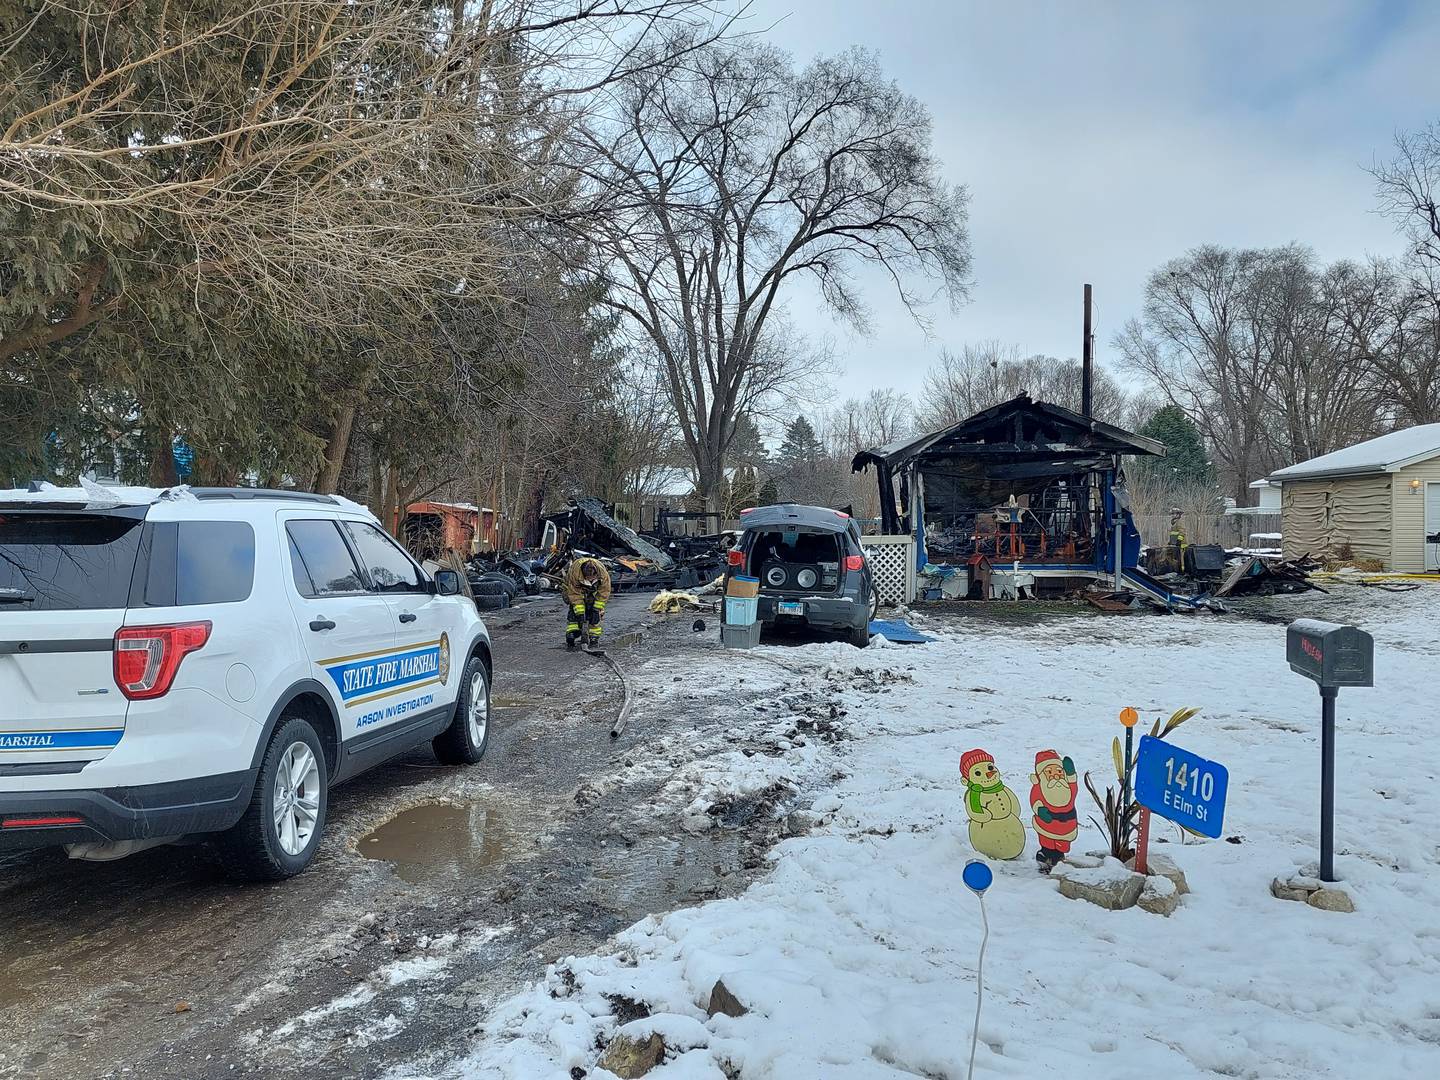 The state fire marshal was on scene Thursday, Jan. 11, 2023, to investigate the cause of a fire at 1410 E. Elm St. in Streator.